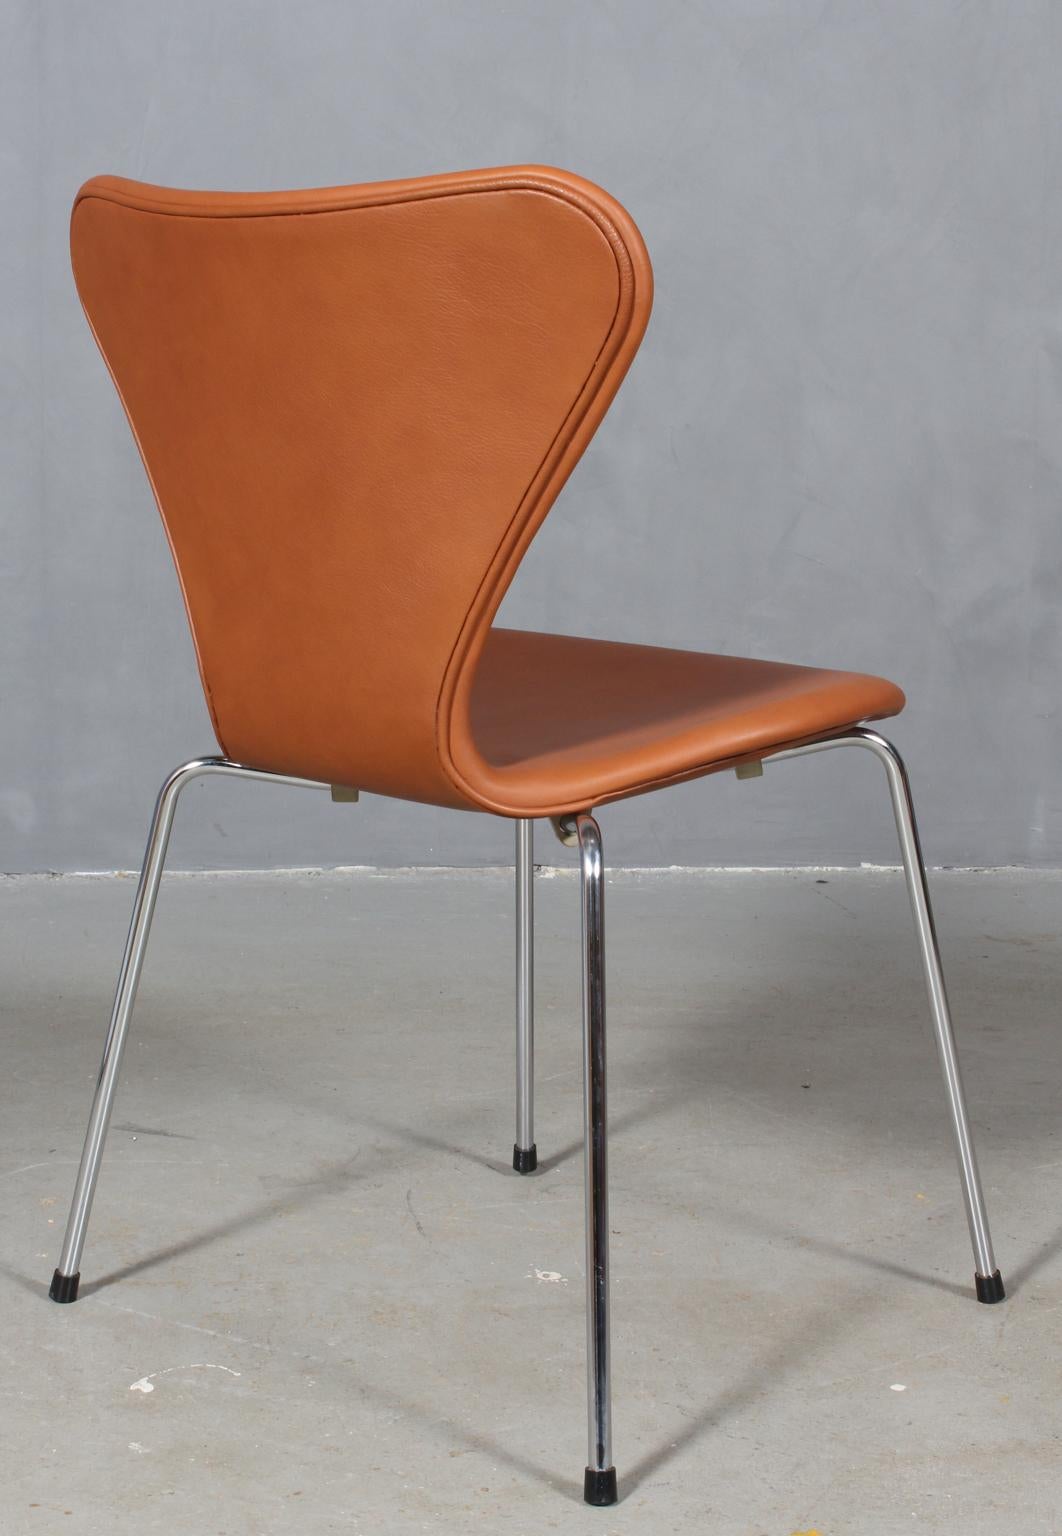 Arne Jacobsen Dining Chair In Excellent Condition For Sale In Esbjerg, DK